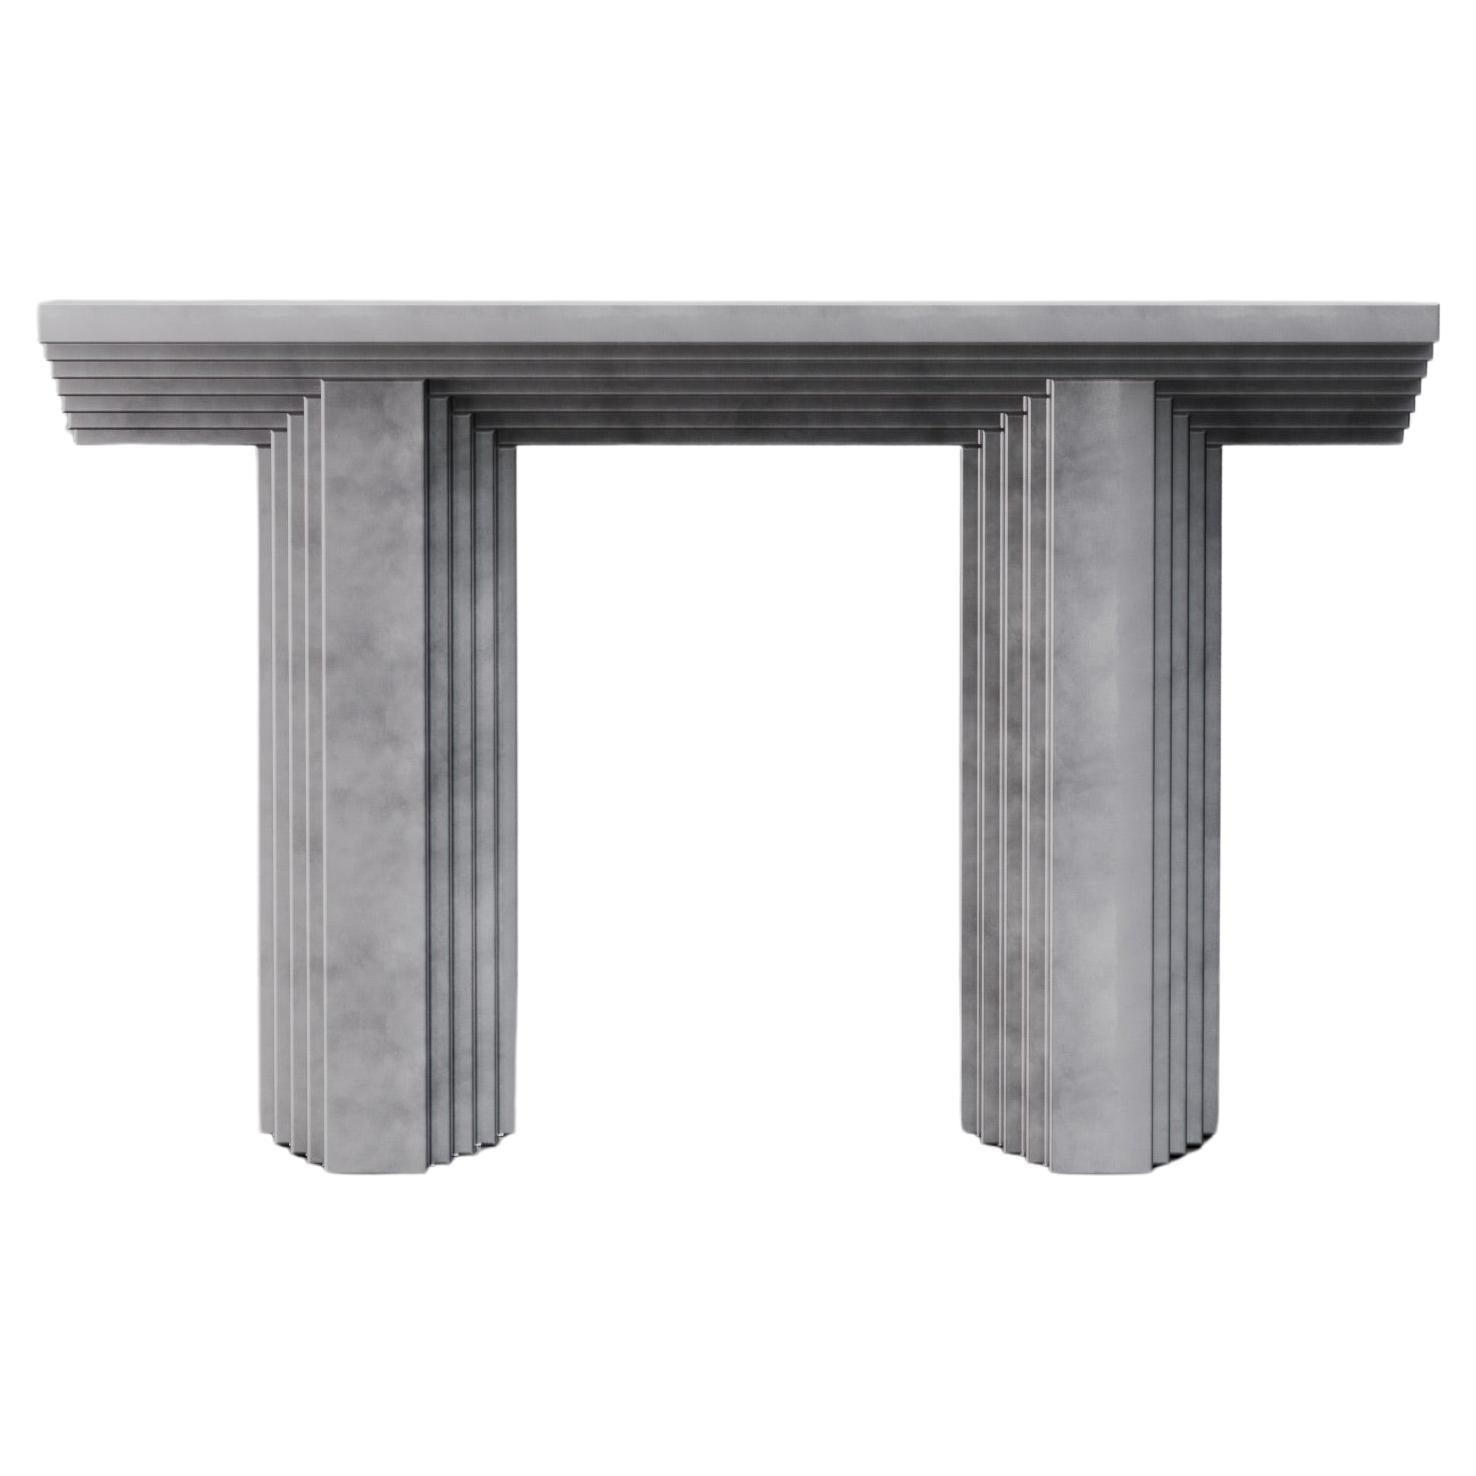 Contemporary grey Aluminium Ater console by Tim Vranken For Sale